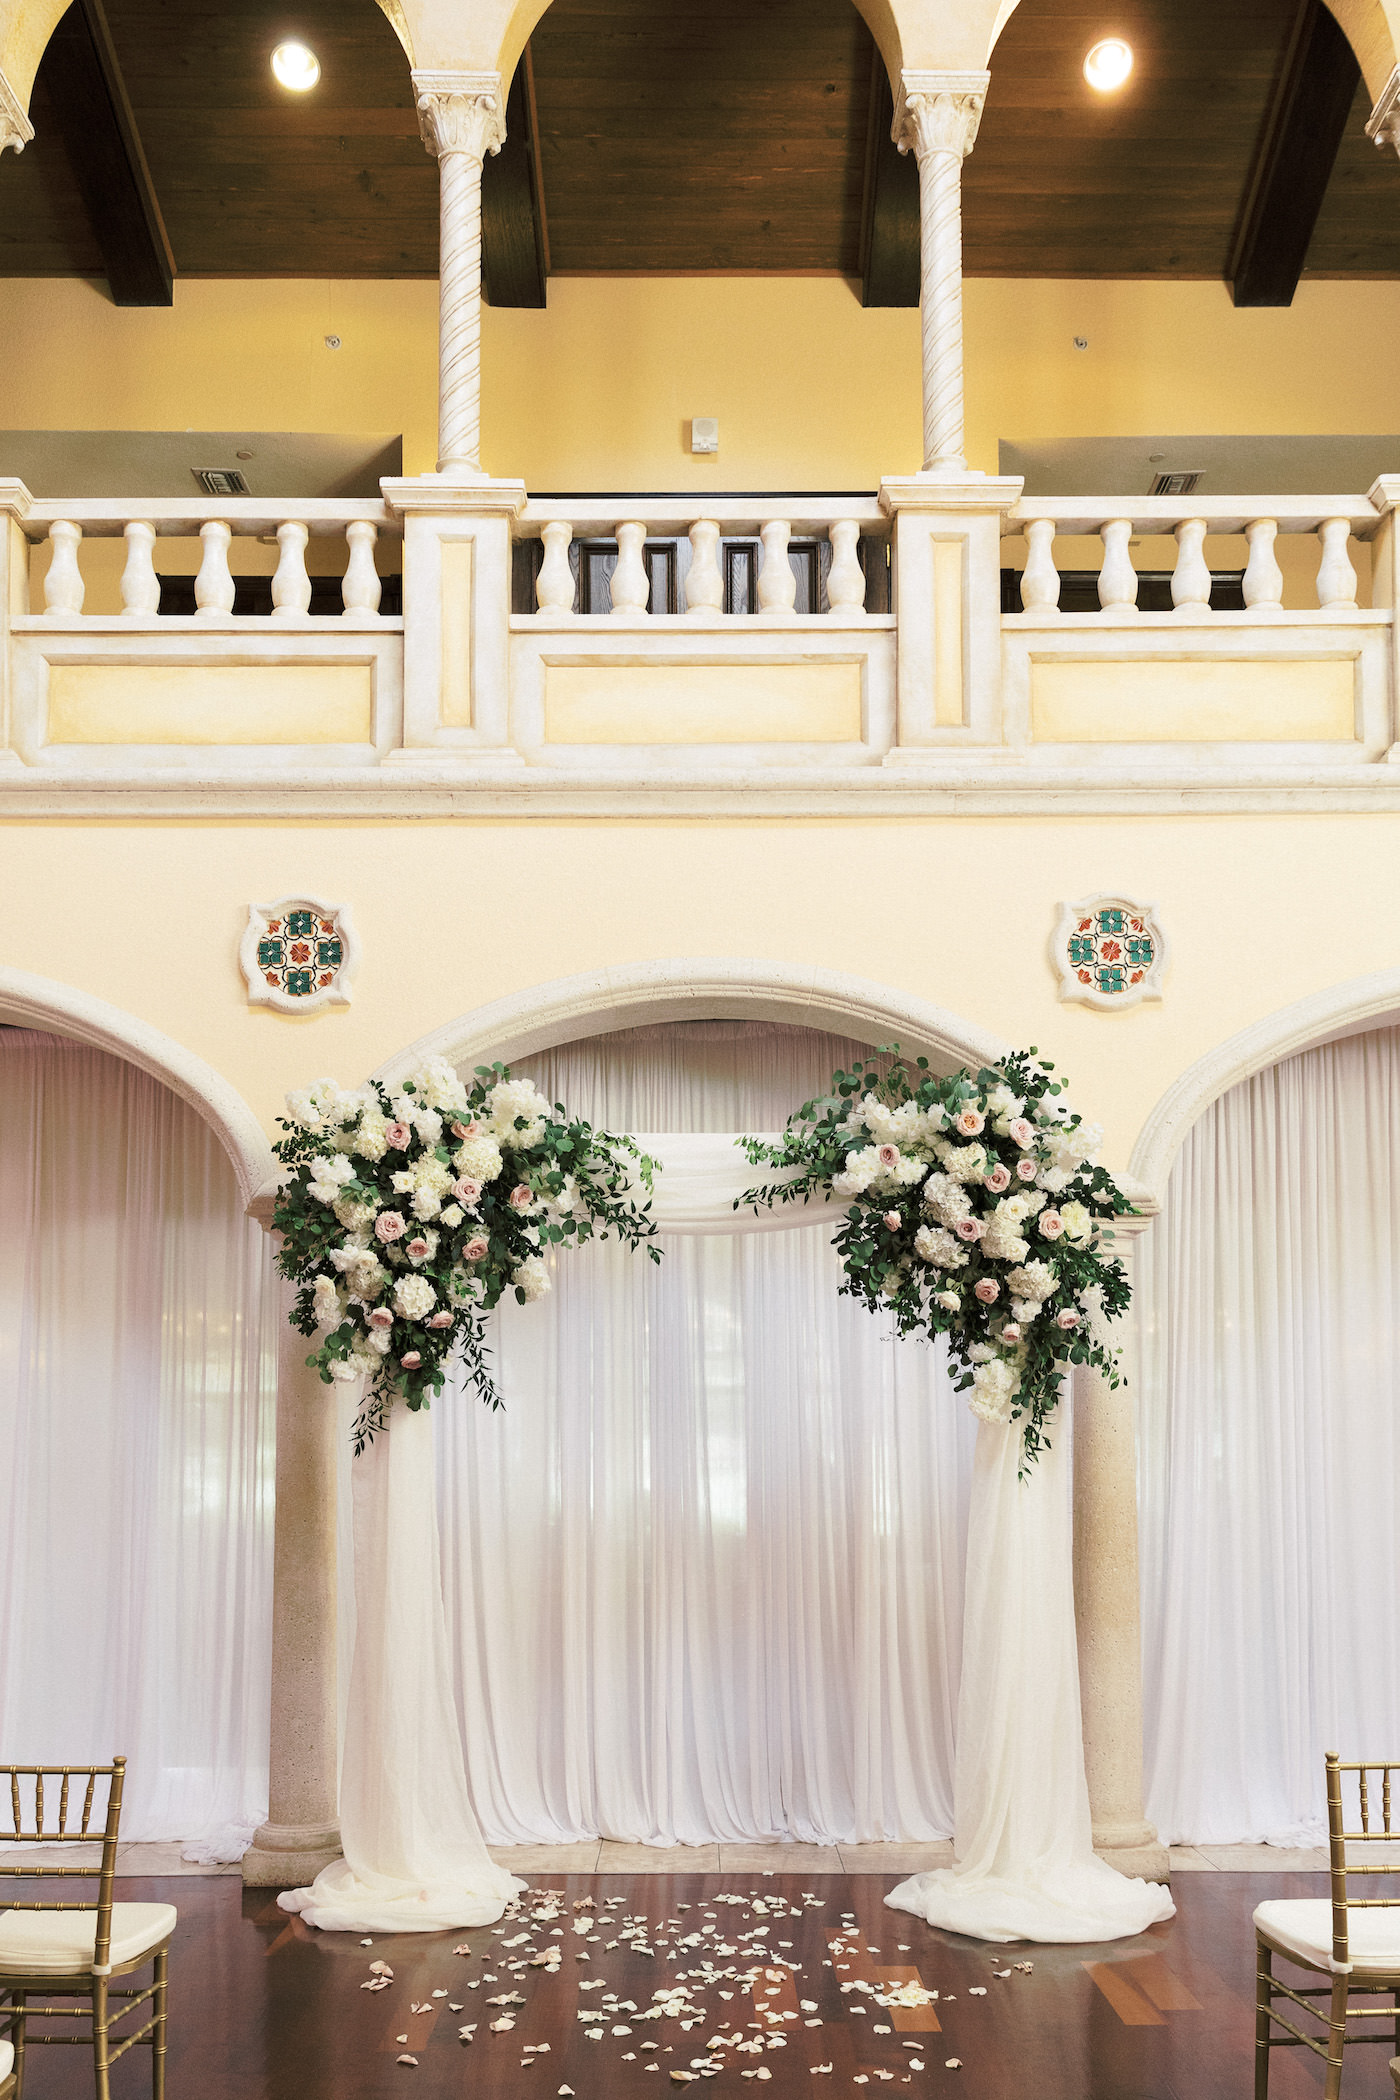 Tampa Wedding Venue Avila Golf & Country Club Indoor Ceremony with Gold Chiavari Chairs, Pipe and Drape Backdrop with Blush Pink and Ivory Rose Floral Arrangements with Eucalyptus Greenery